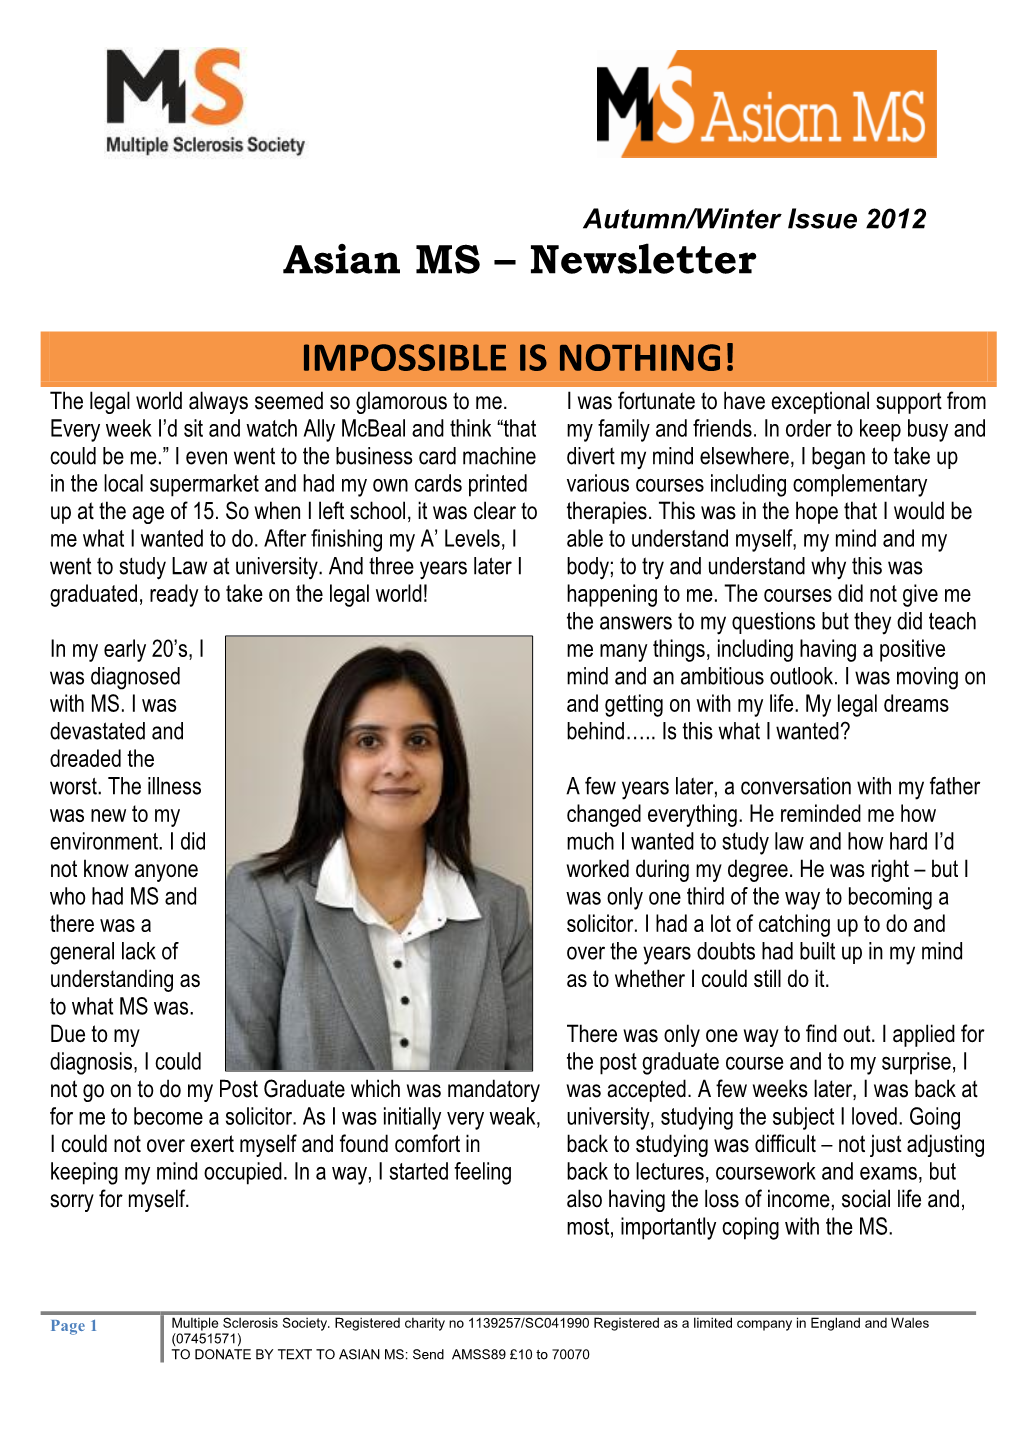 Asian MS – Newsletter IMPOSSIBLE IS NOTHING!